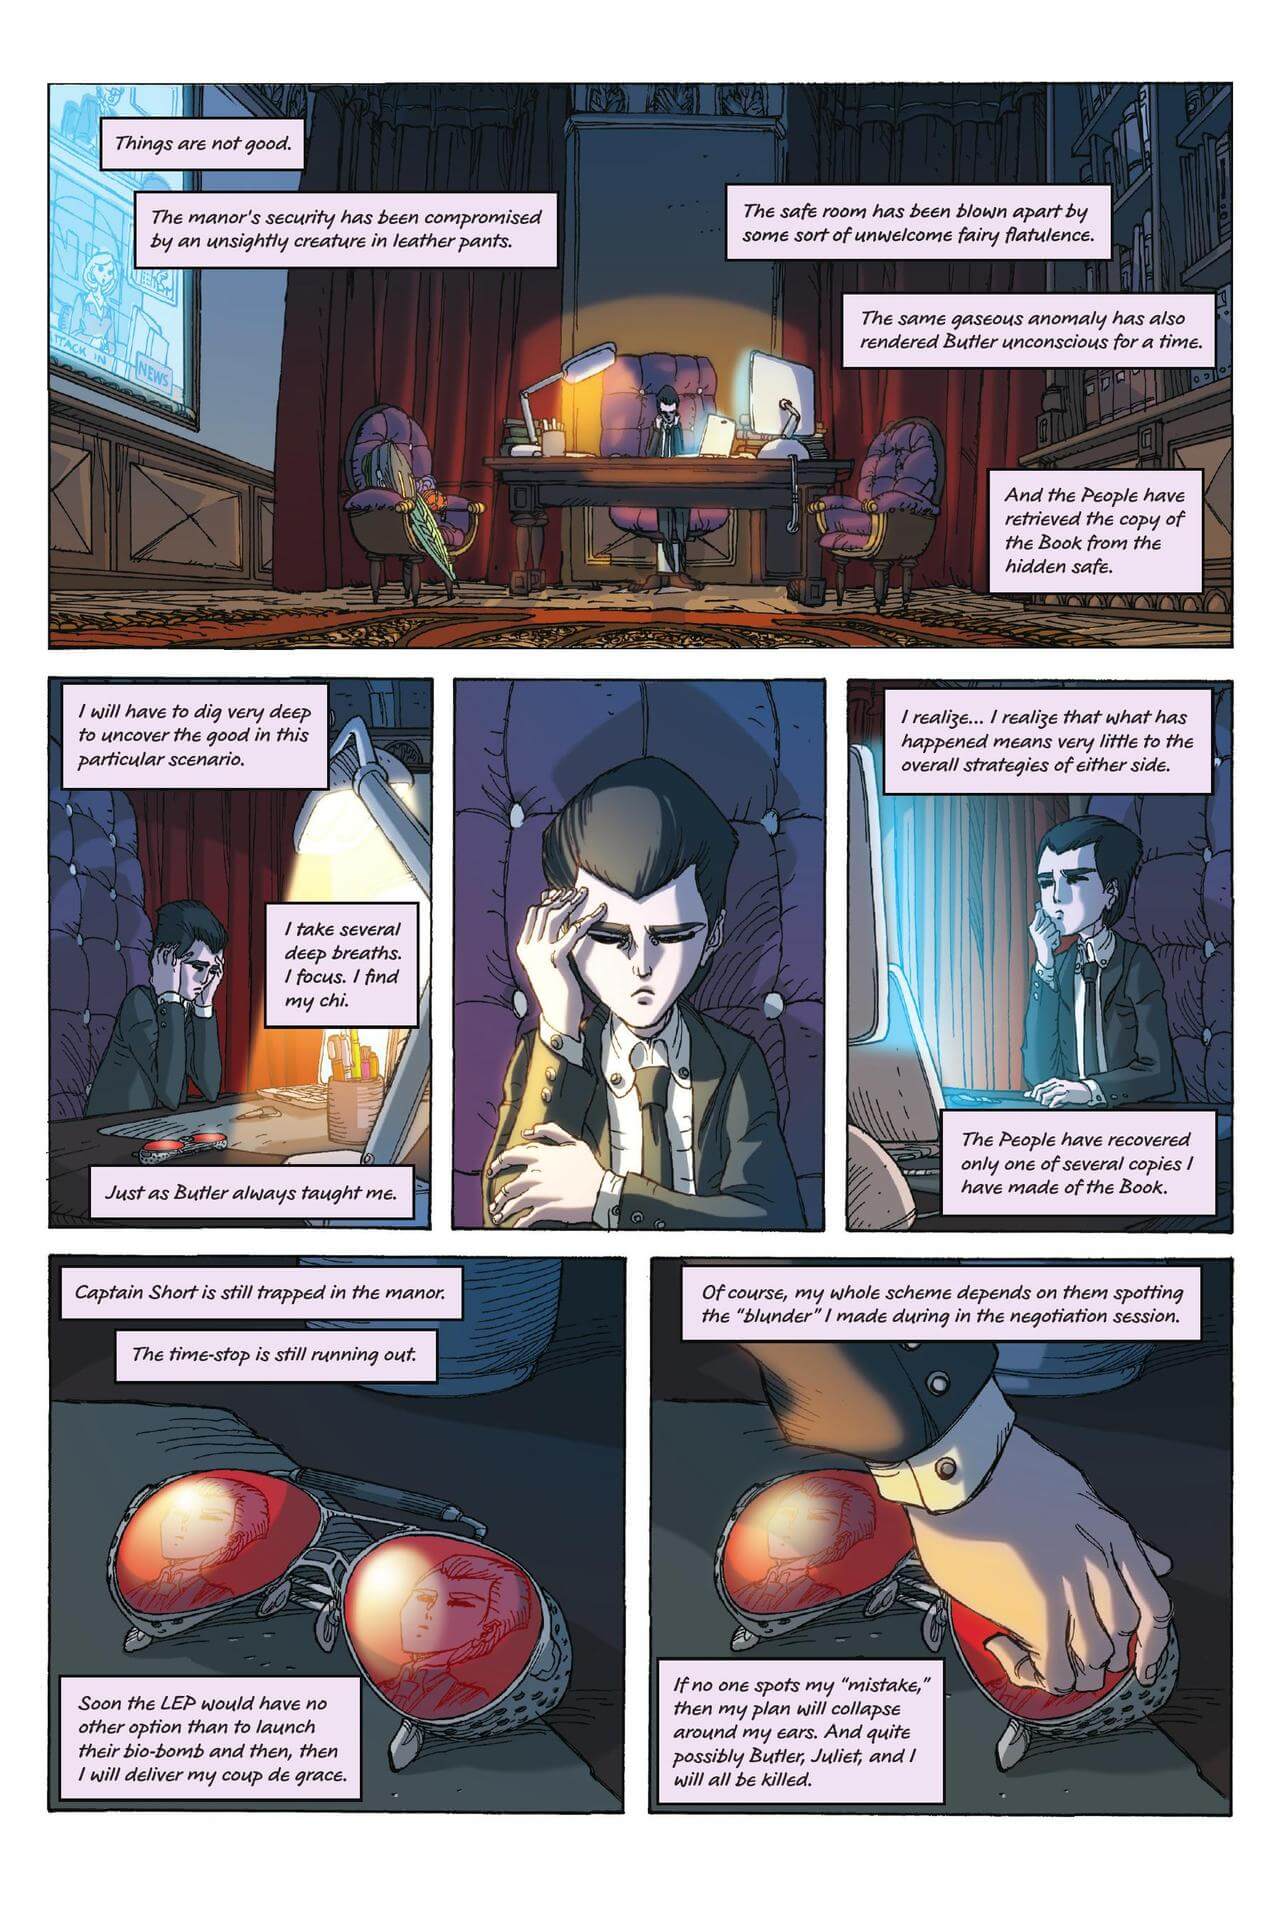 page 80 of artemis fowl the graphic novel